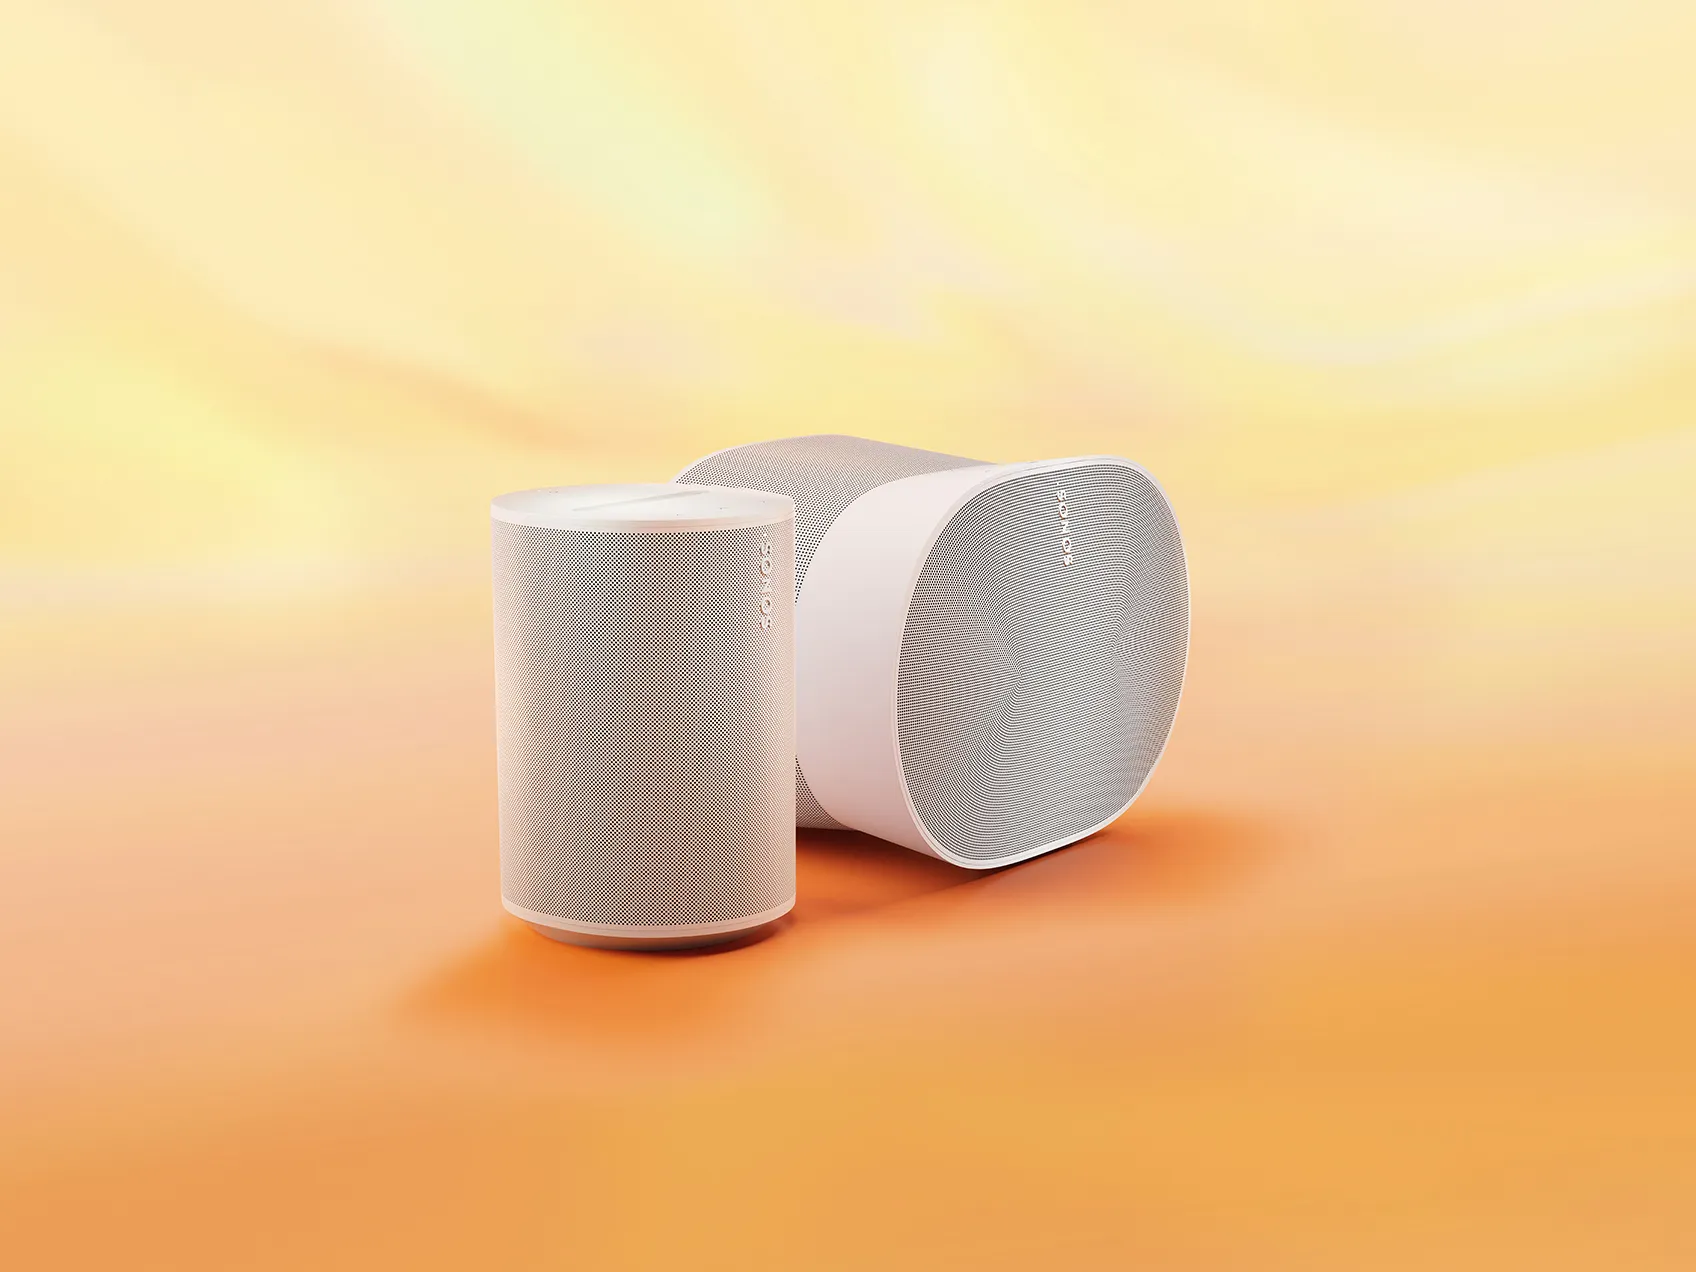 Sonos Teacher Discount | Education Discount on Sonos Wiresless Speakers & Sonos Home Theater